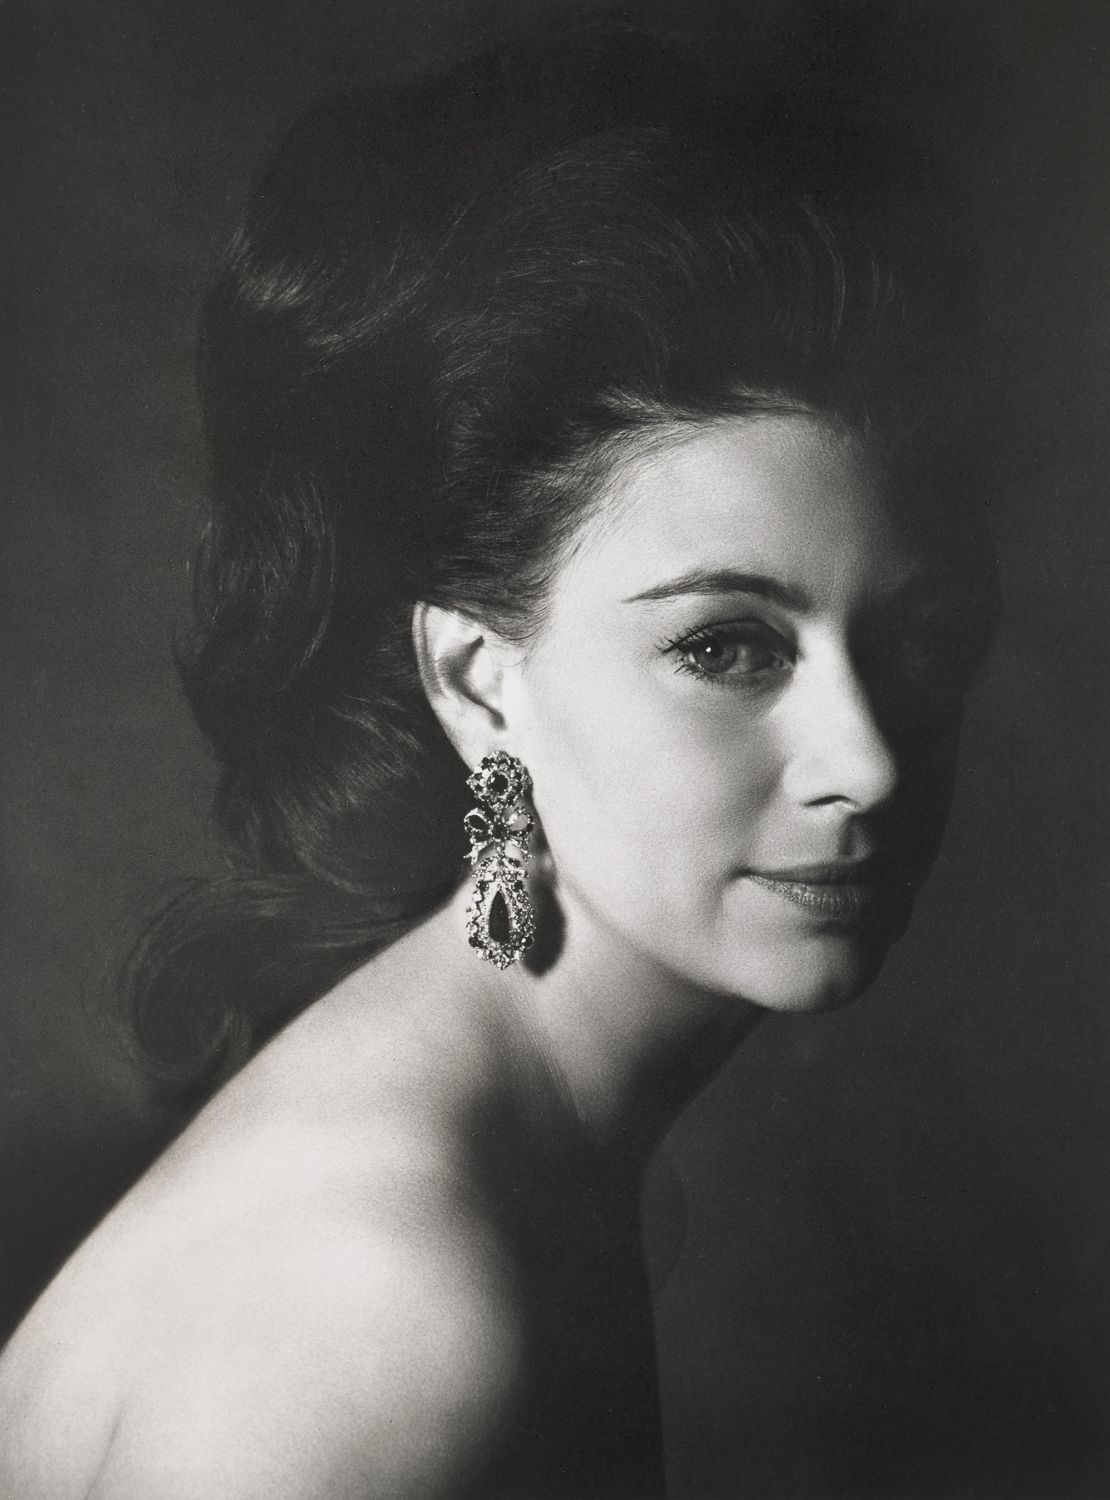 Princess Margaret as captured by her then-husband Lord Snowdon in 1967.